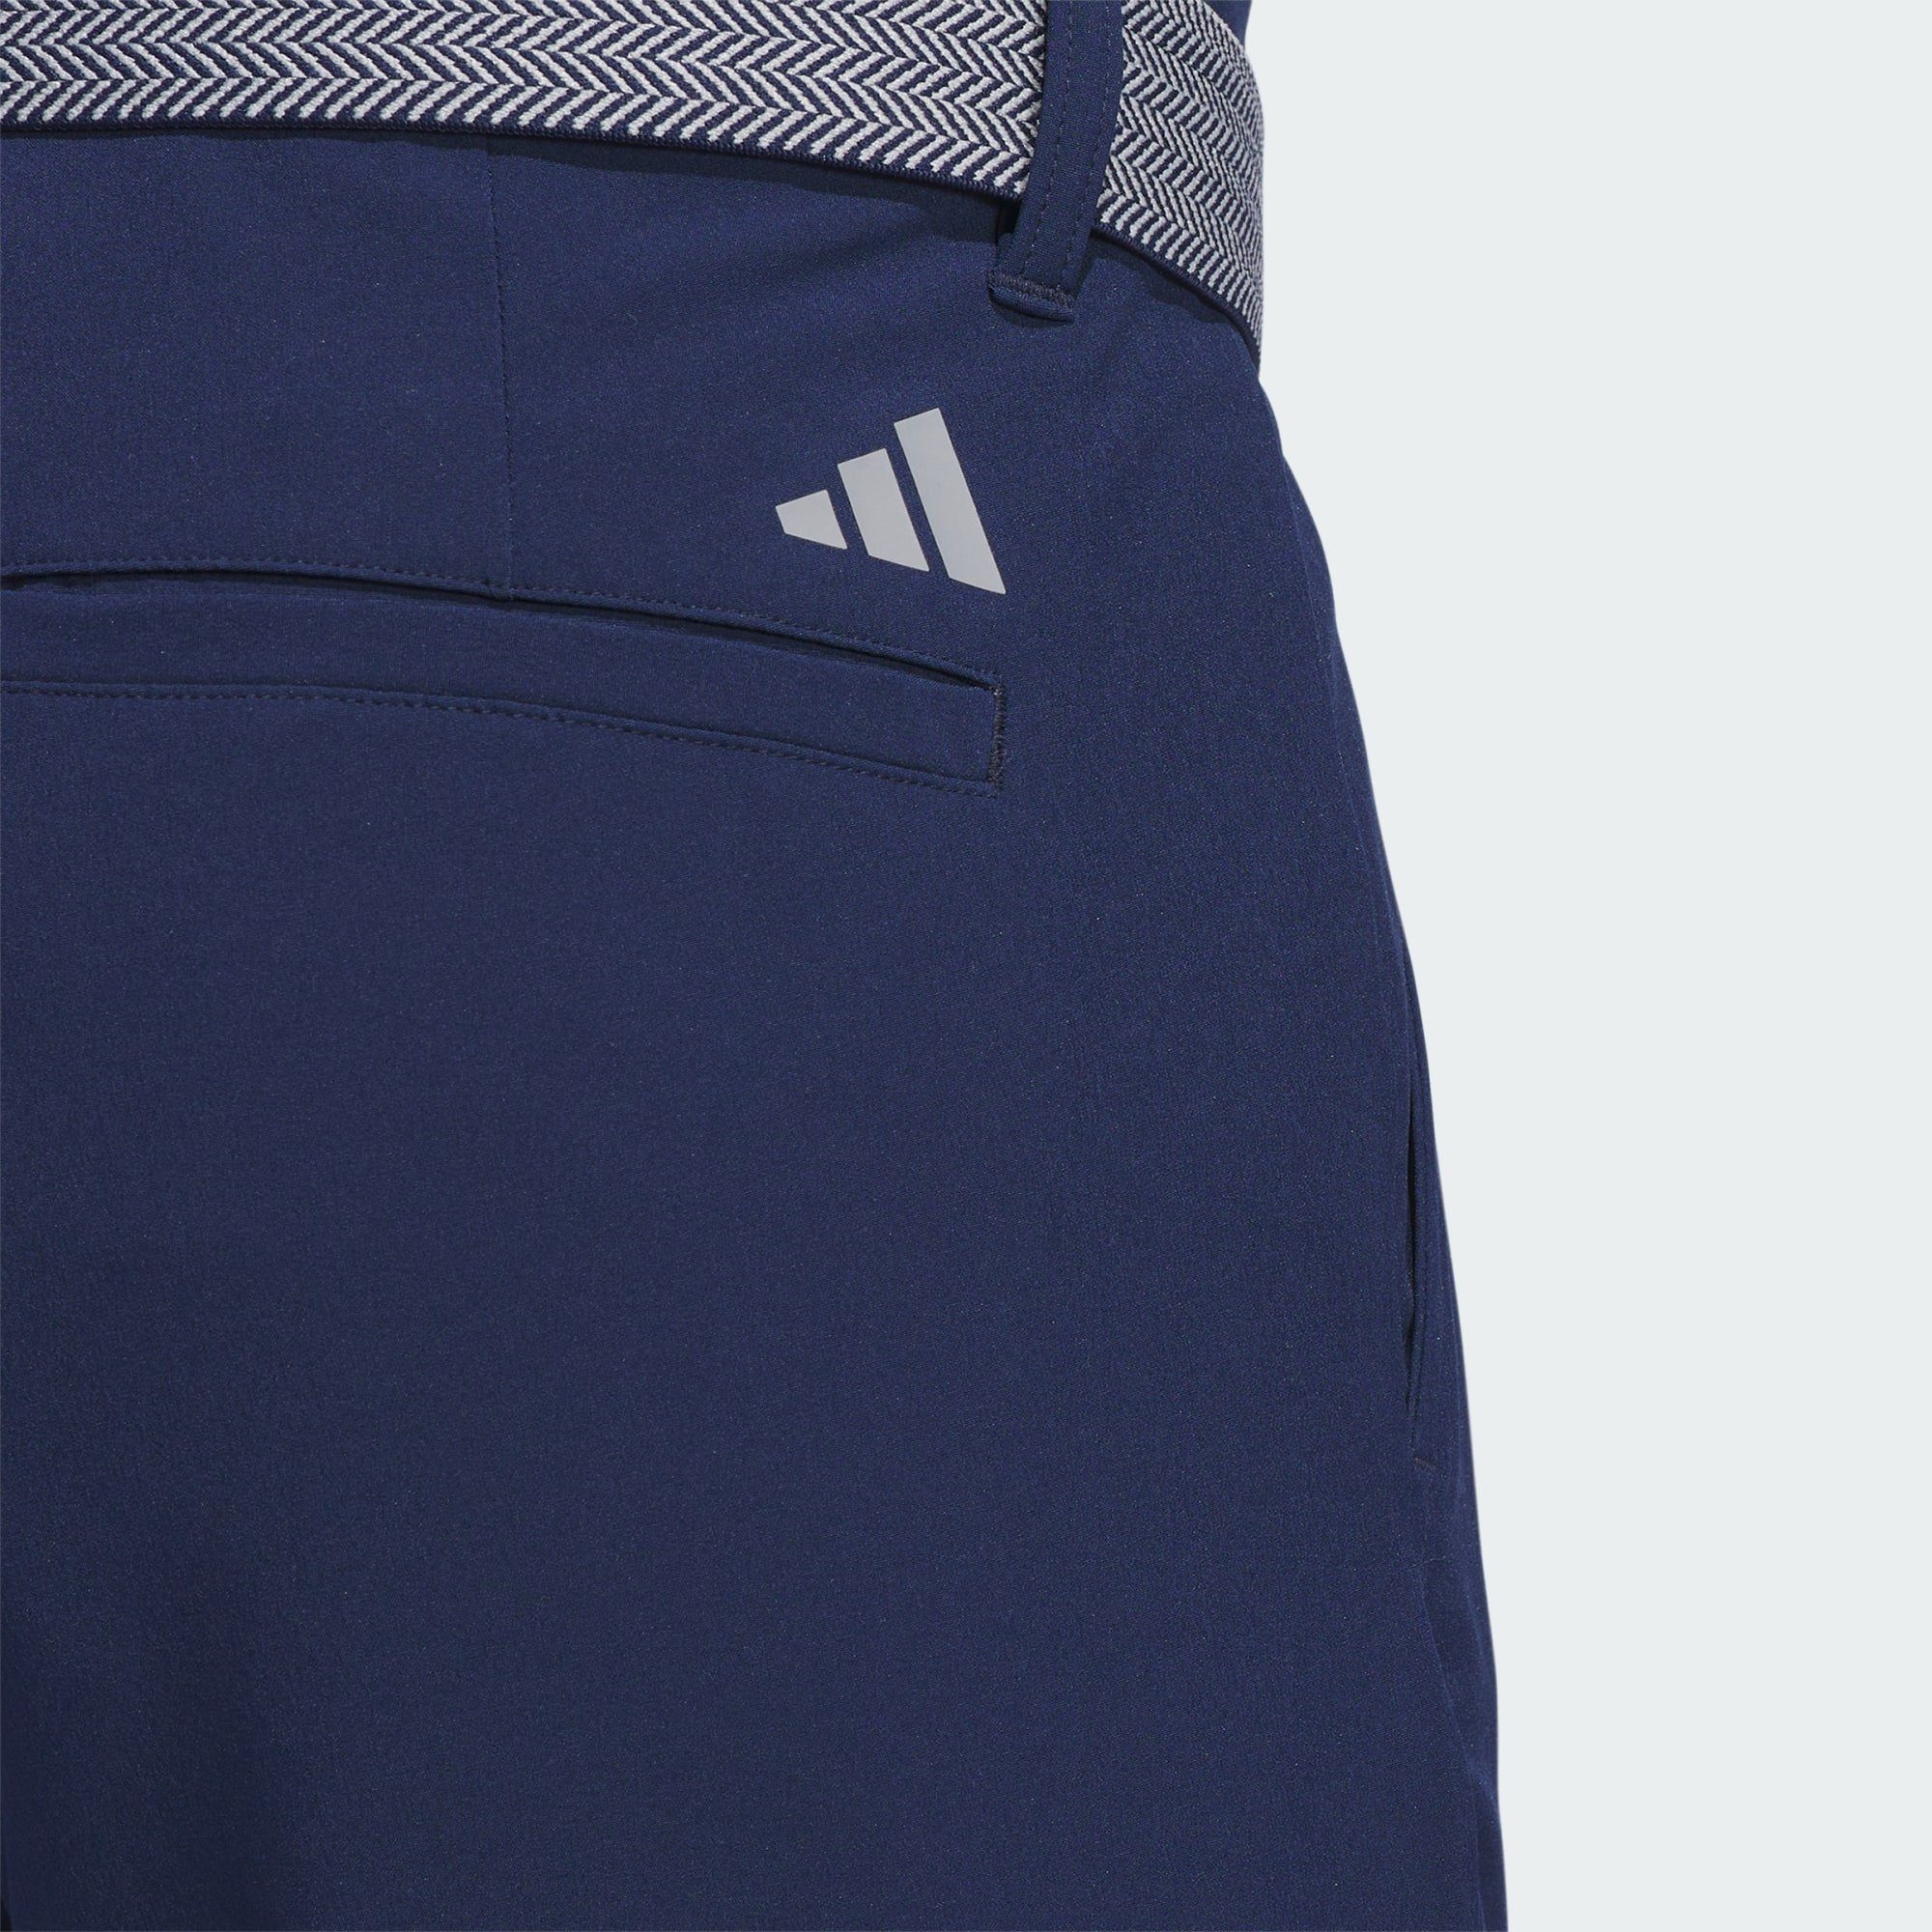 ULTIMATE365 Performance TAPERED Golfhose Collegiate GOLFHOSE adidas Navy